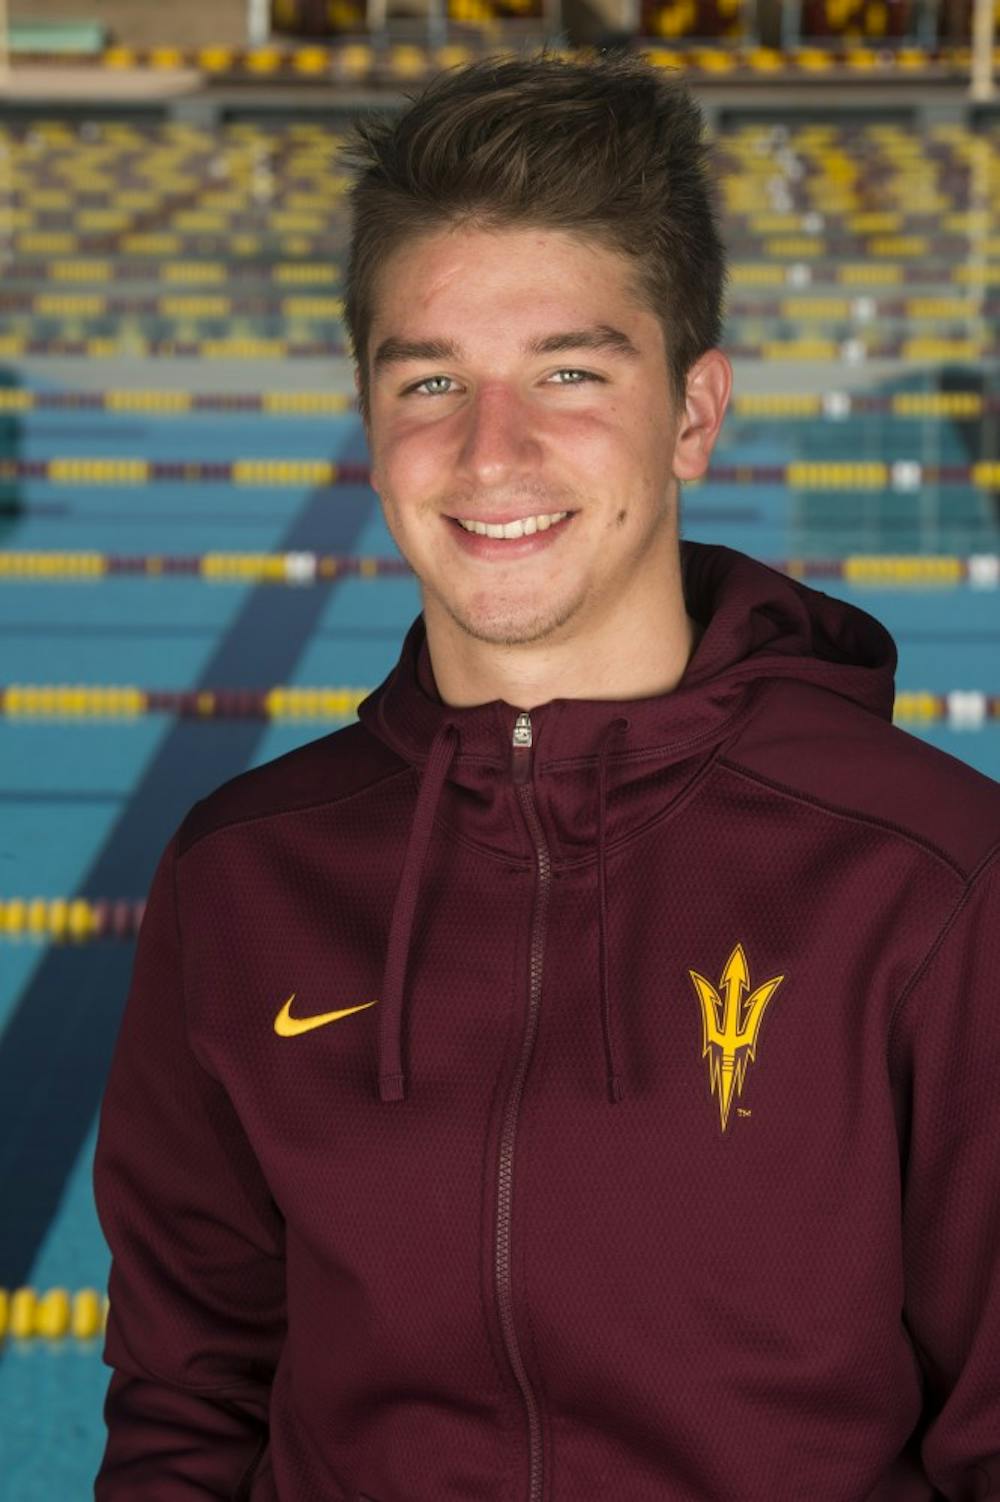 Hungarian sophomore Richard Bohus set the ASU record in the 100 backstroke with a time of 47.16 in 2014. Bohus, a 2012 Olympian, is looking to return from injury for the Pac-12 Championships. (Photo courtesy of Sun Devil Athletics)